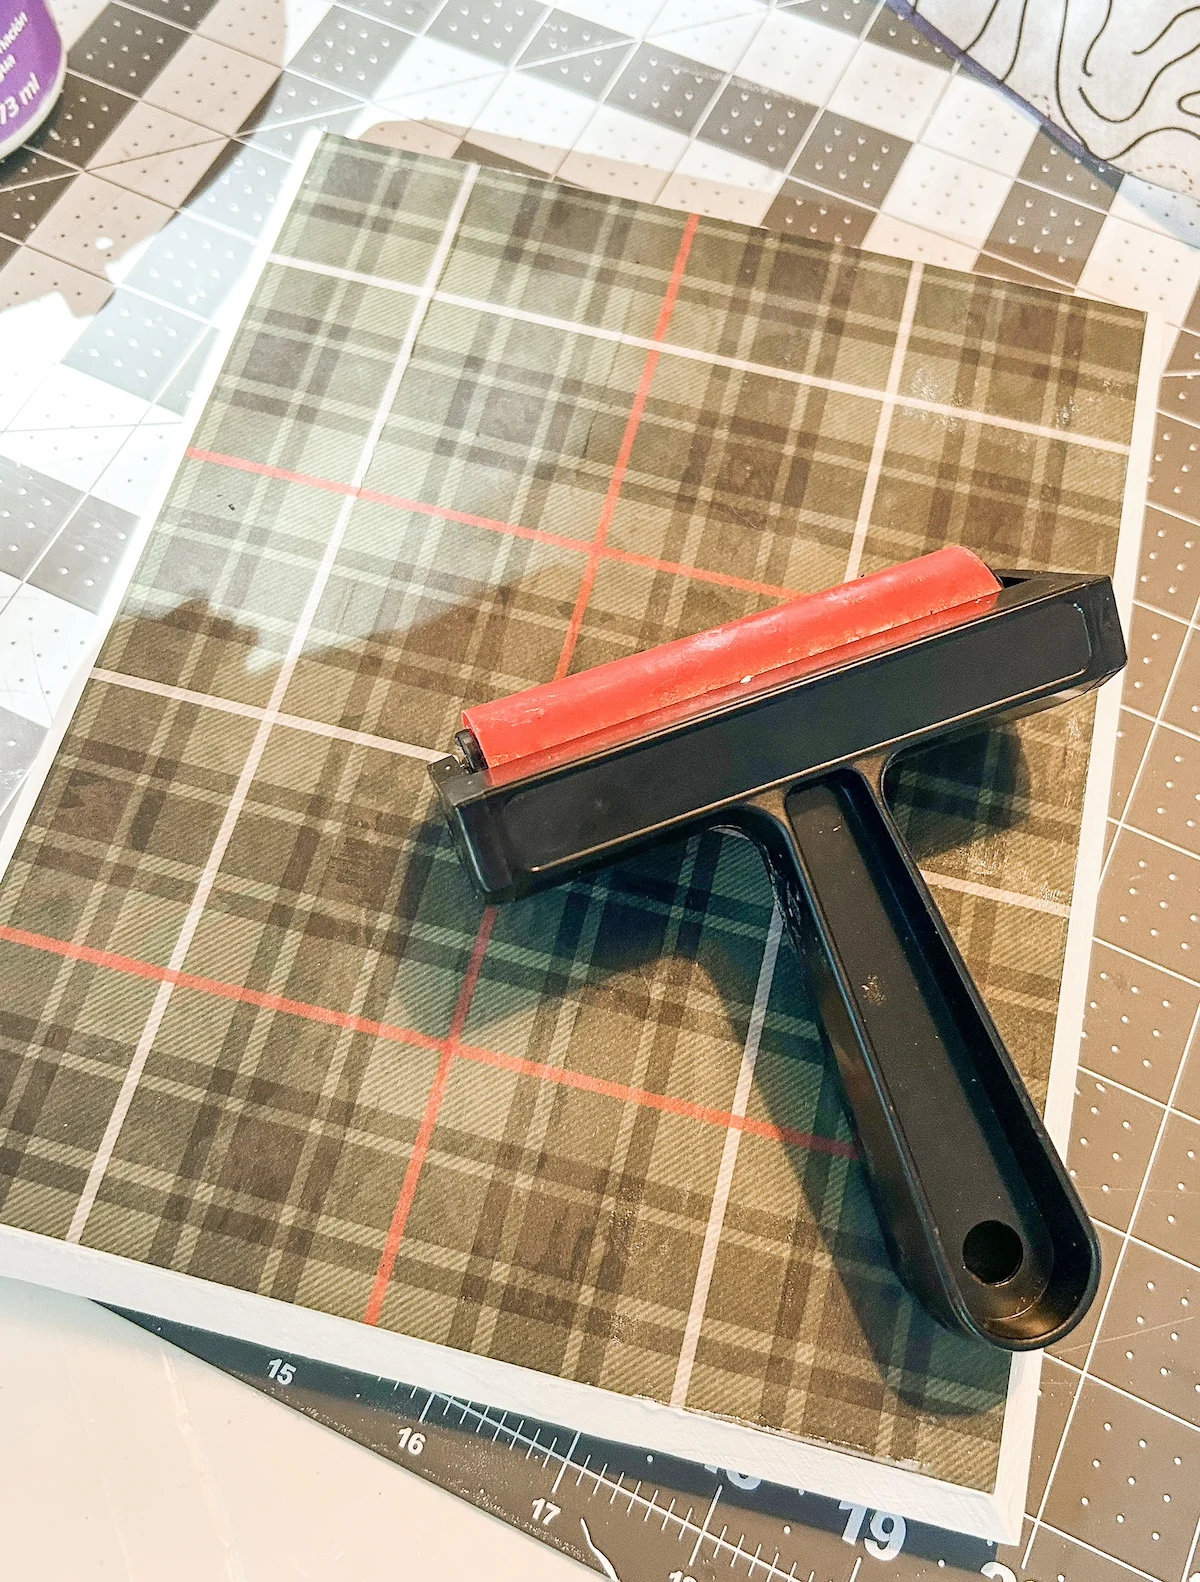 Brayer sitting on top of plaid paper